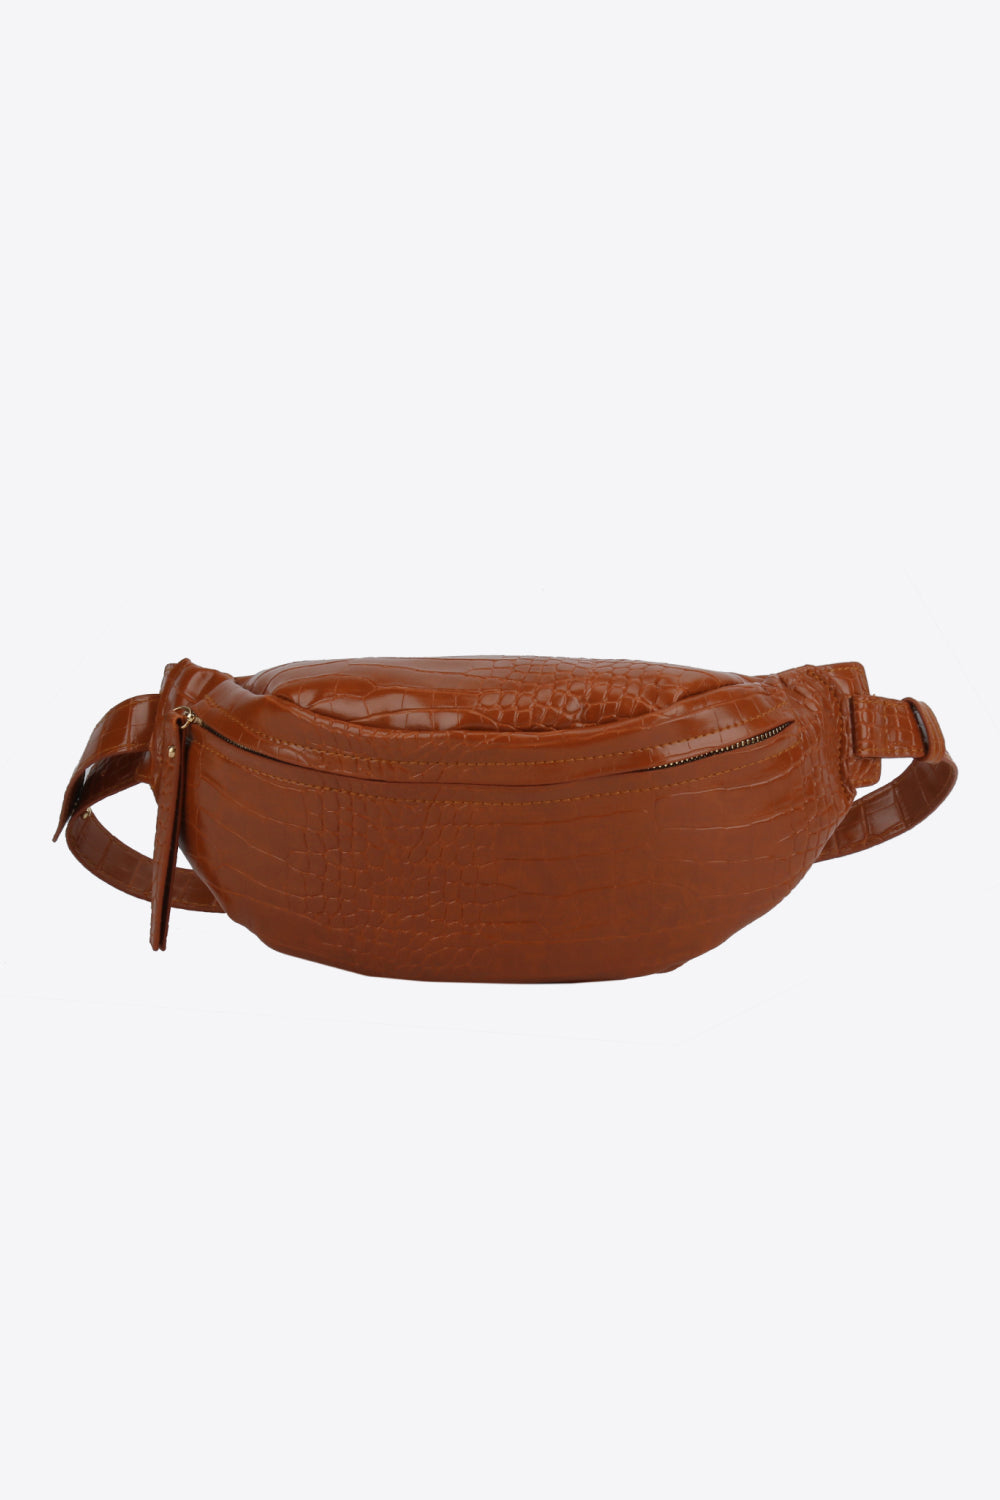 PU Leather Chest Bag - AllIn Computer